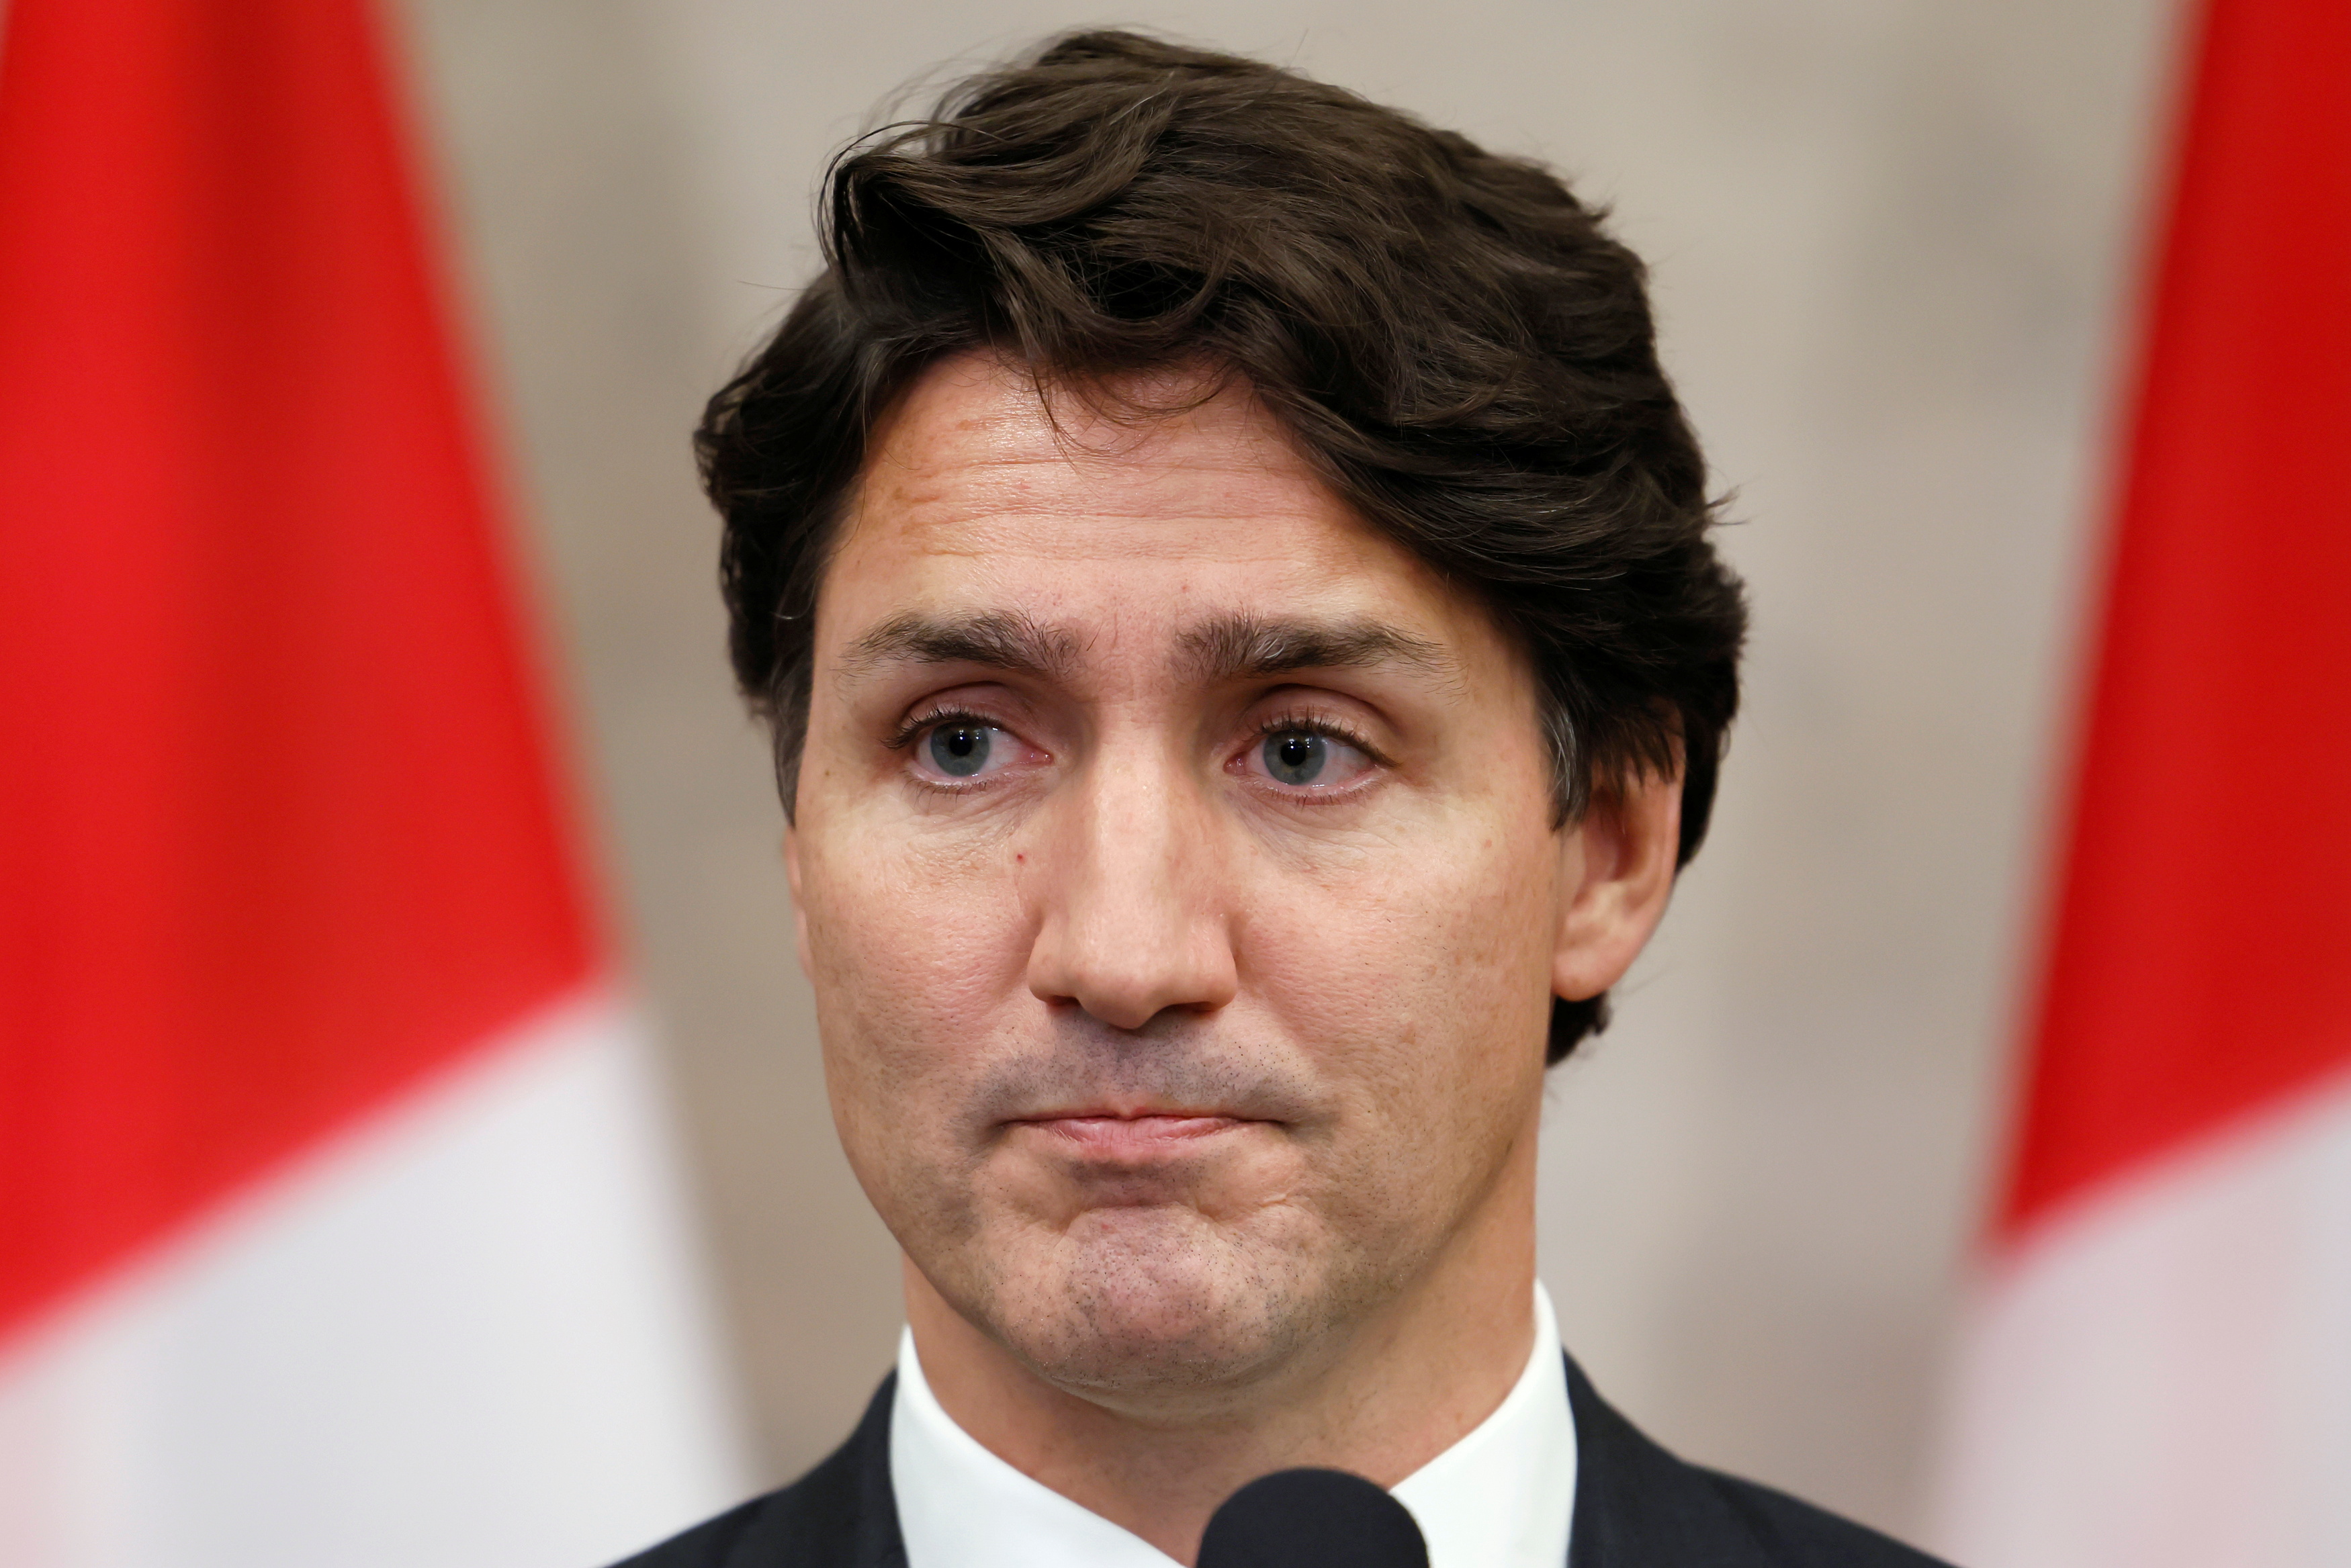 Canada's Prime Minister Justin Trudeau holds a press conference in Ottawa